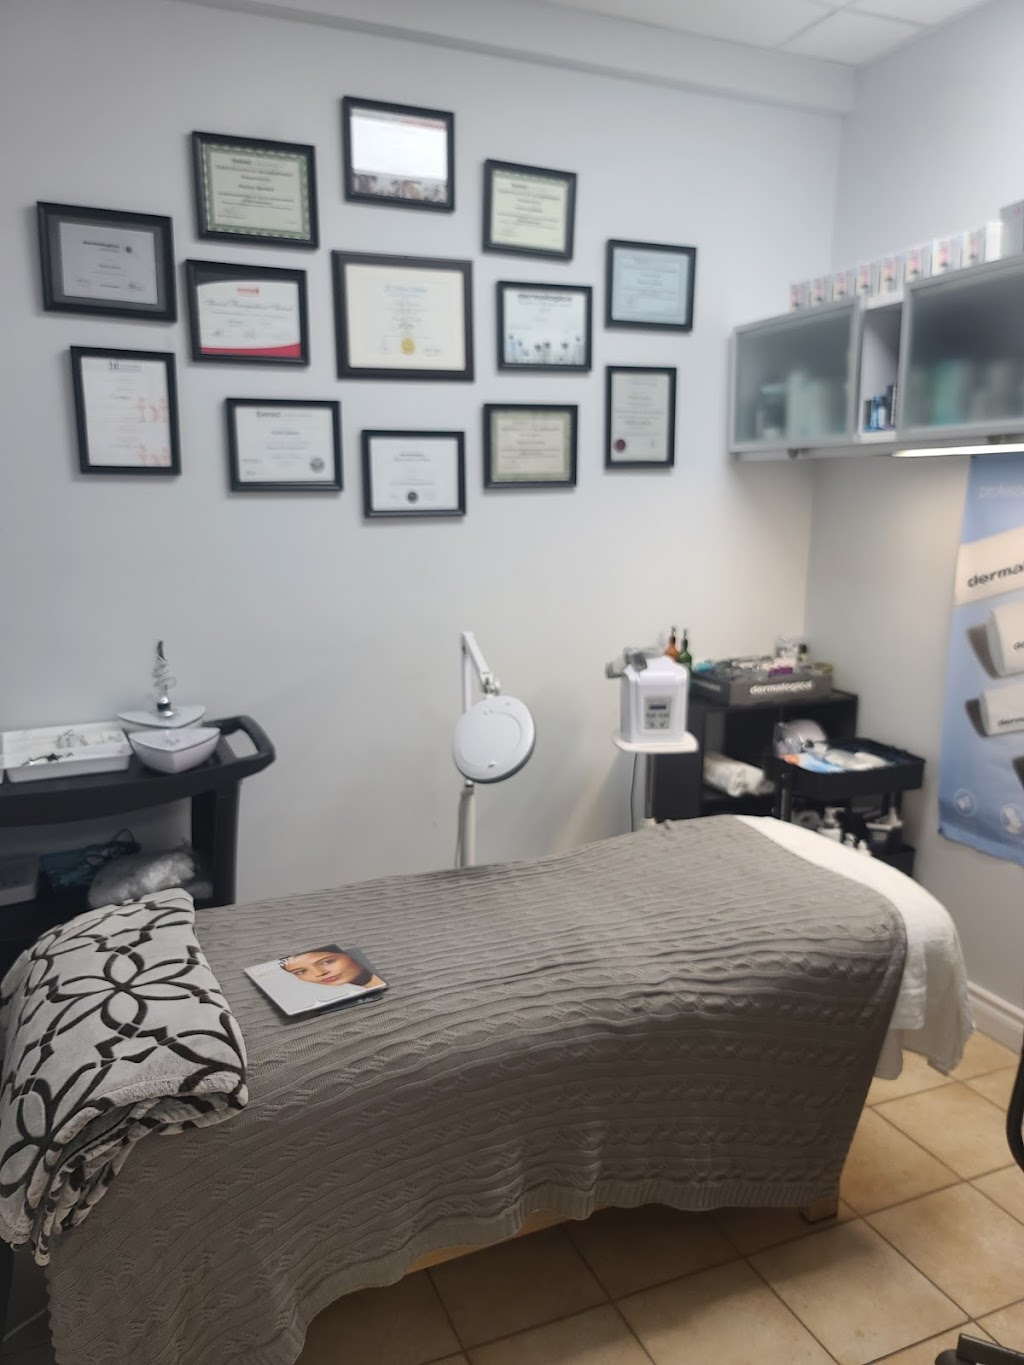 Nadis Aesthetics Skin Care | 2727 Courtice Rd, Courtice, ON L1E 3A2, Canada | Phone: (905) 429-2222